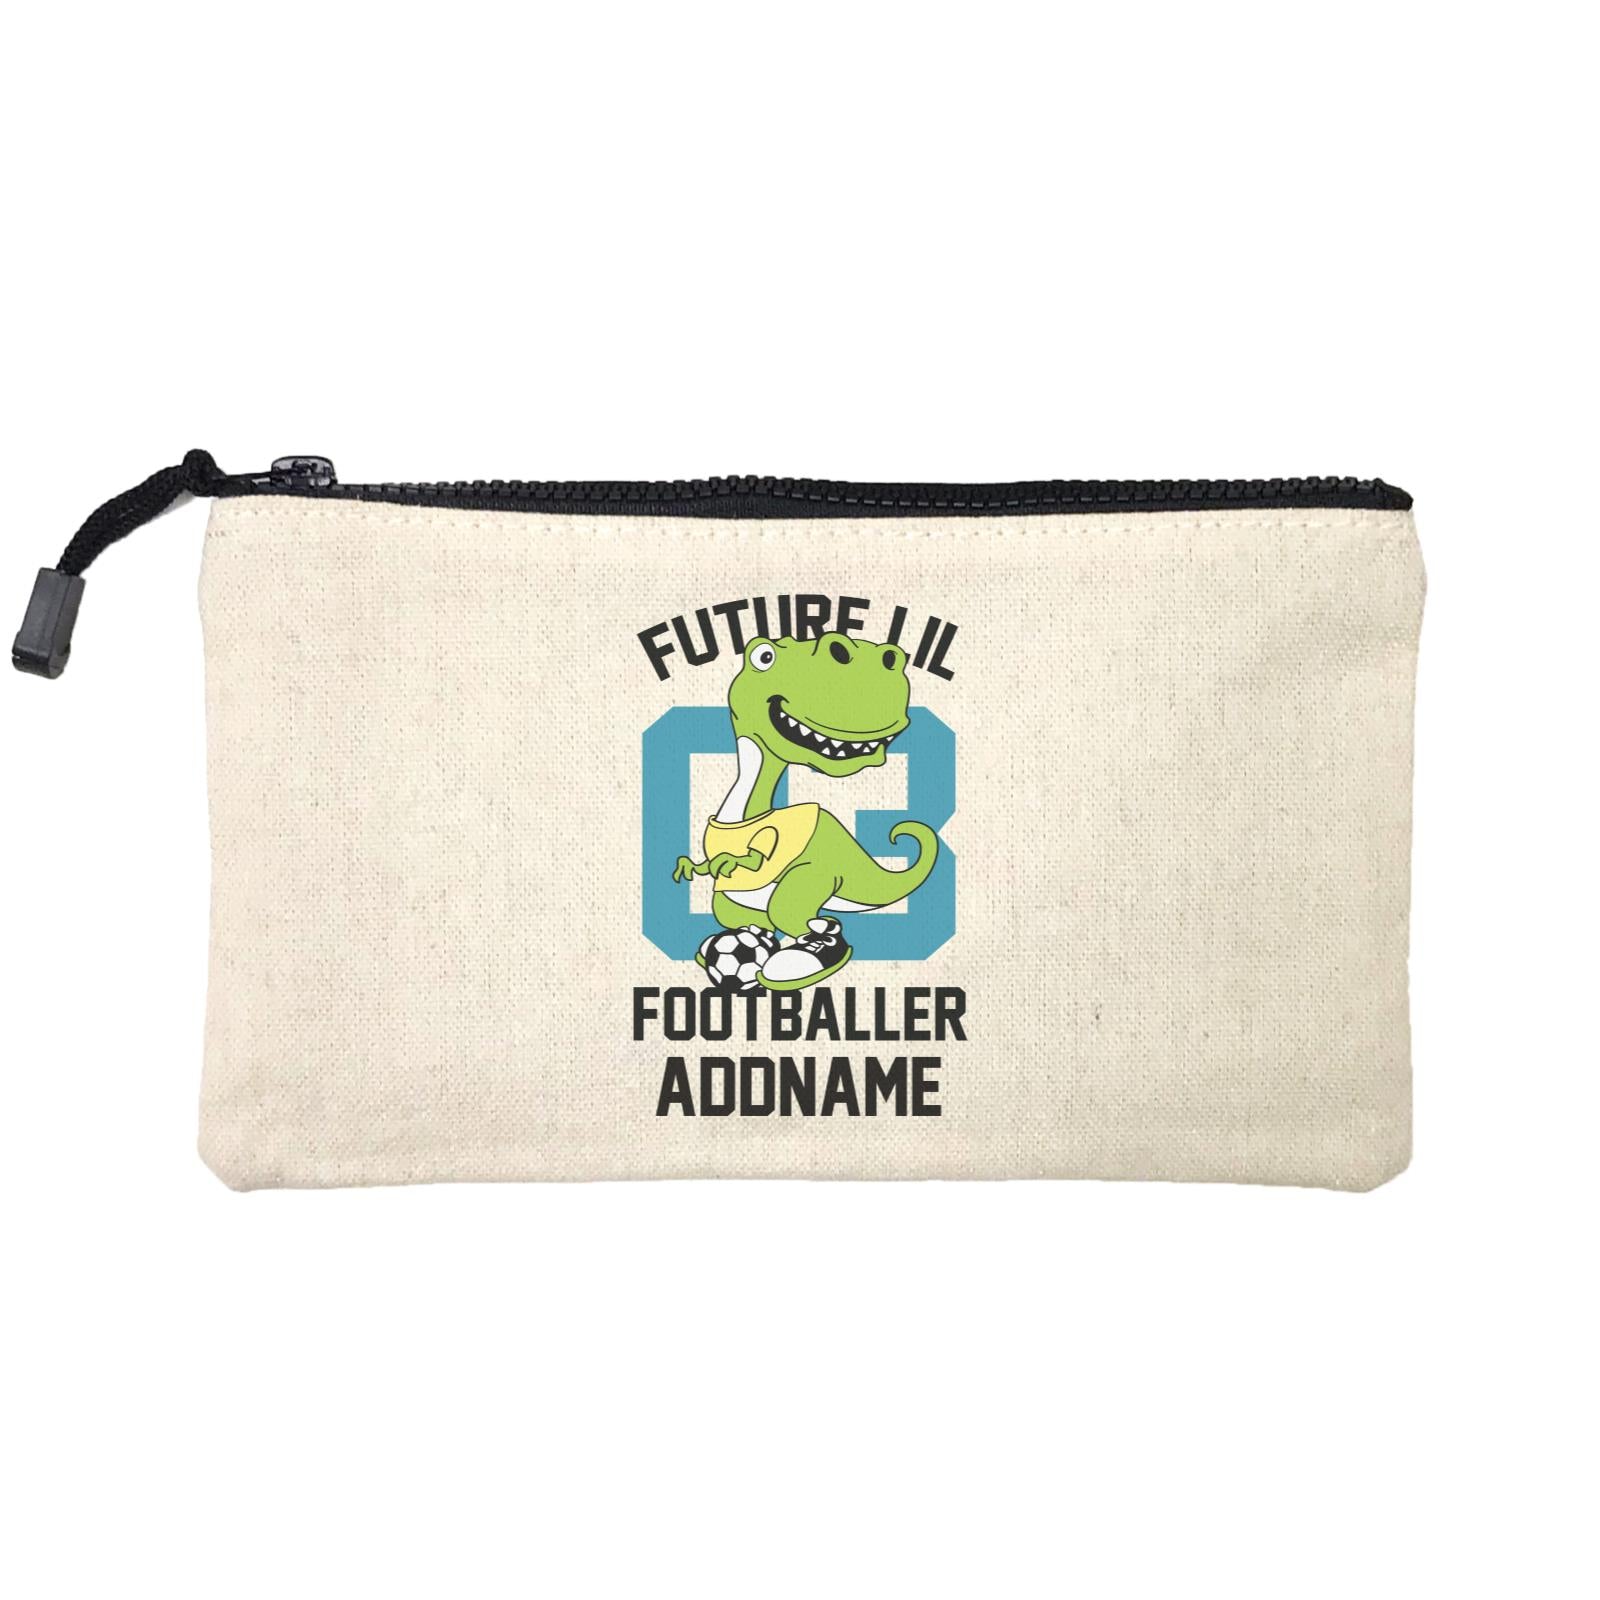 Cool Vibrant Series Future Lil Footballer Dinosaur Addname Mini Accessories Stationery Pouch